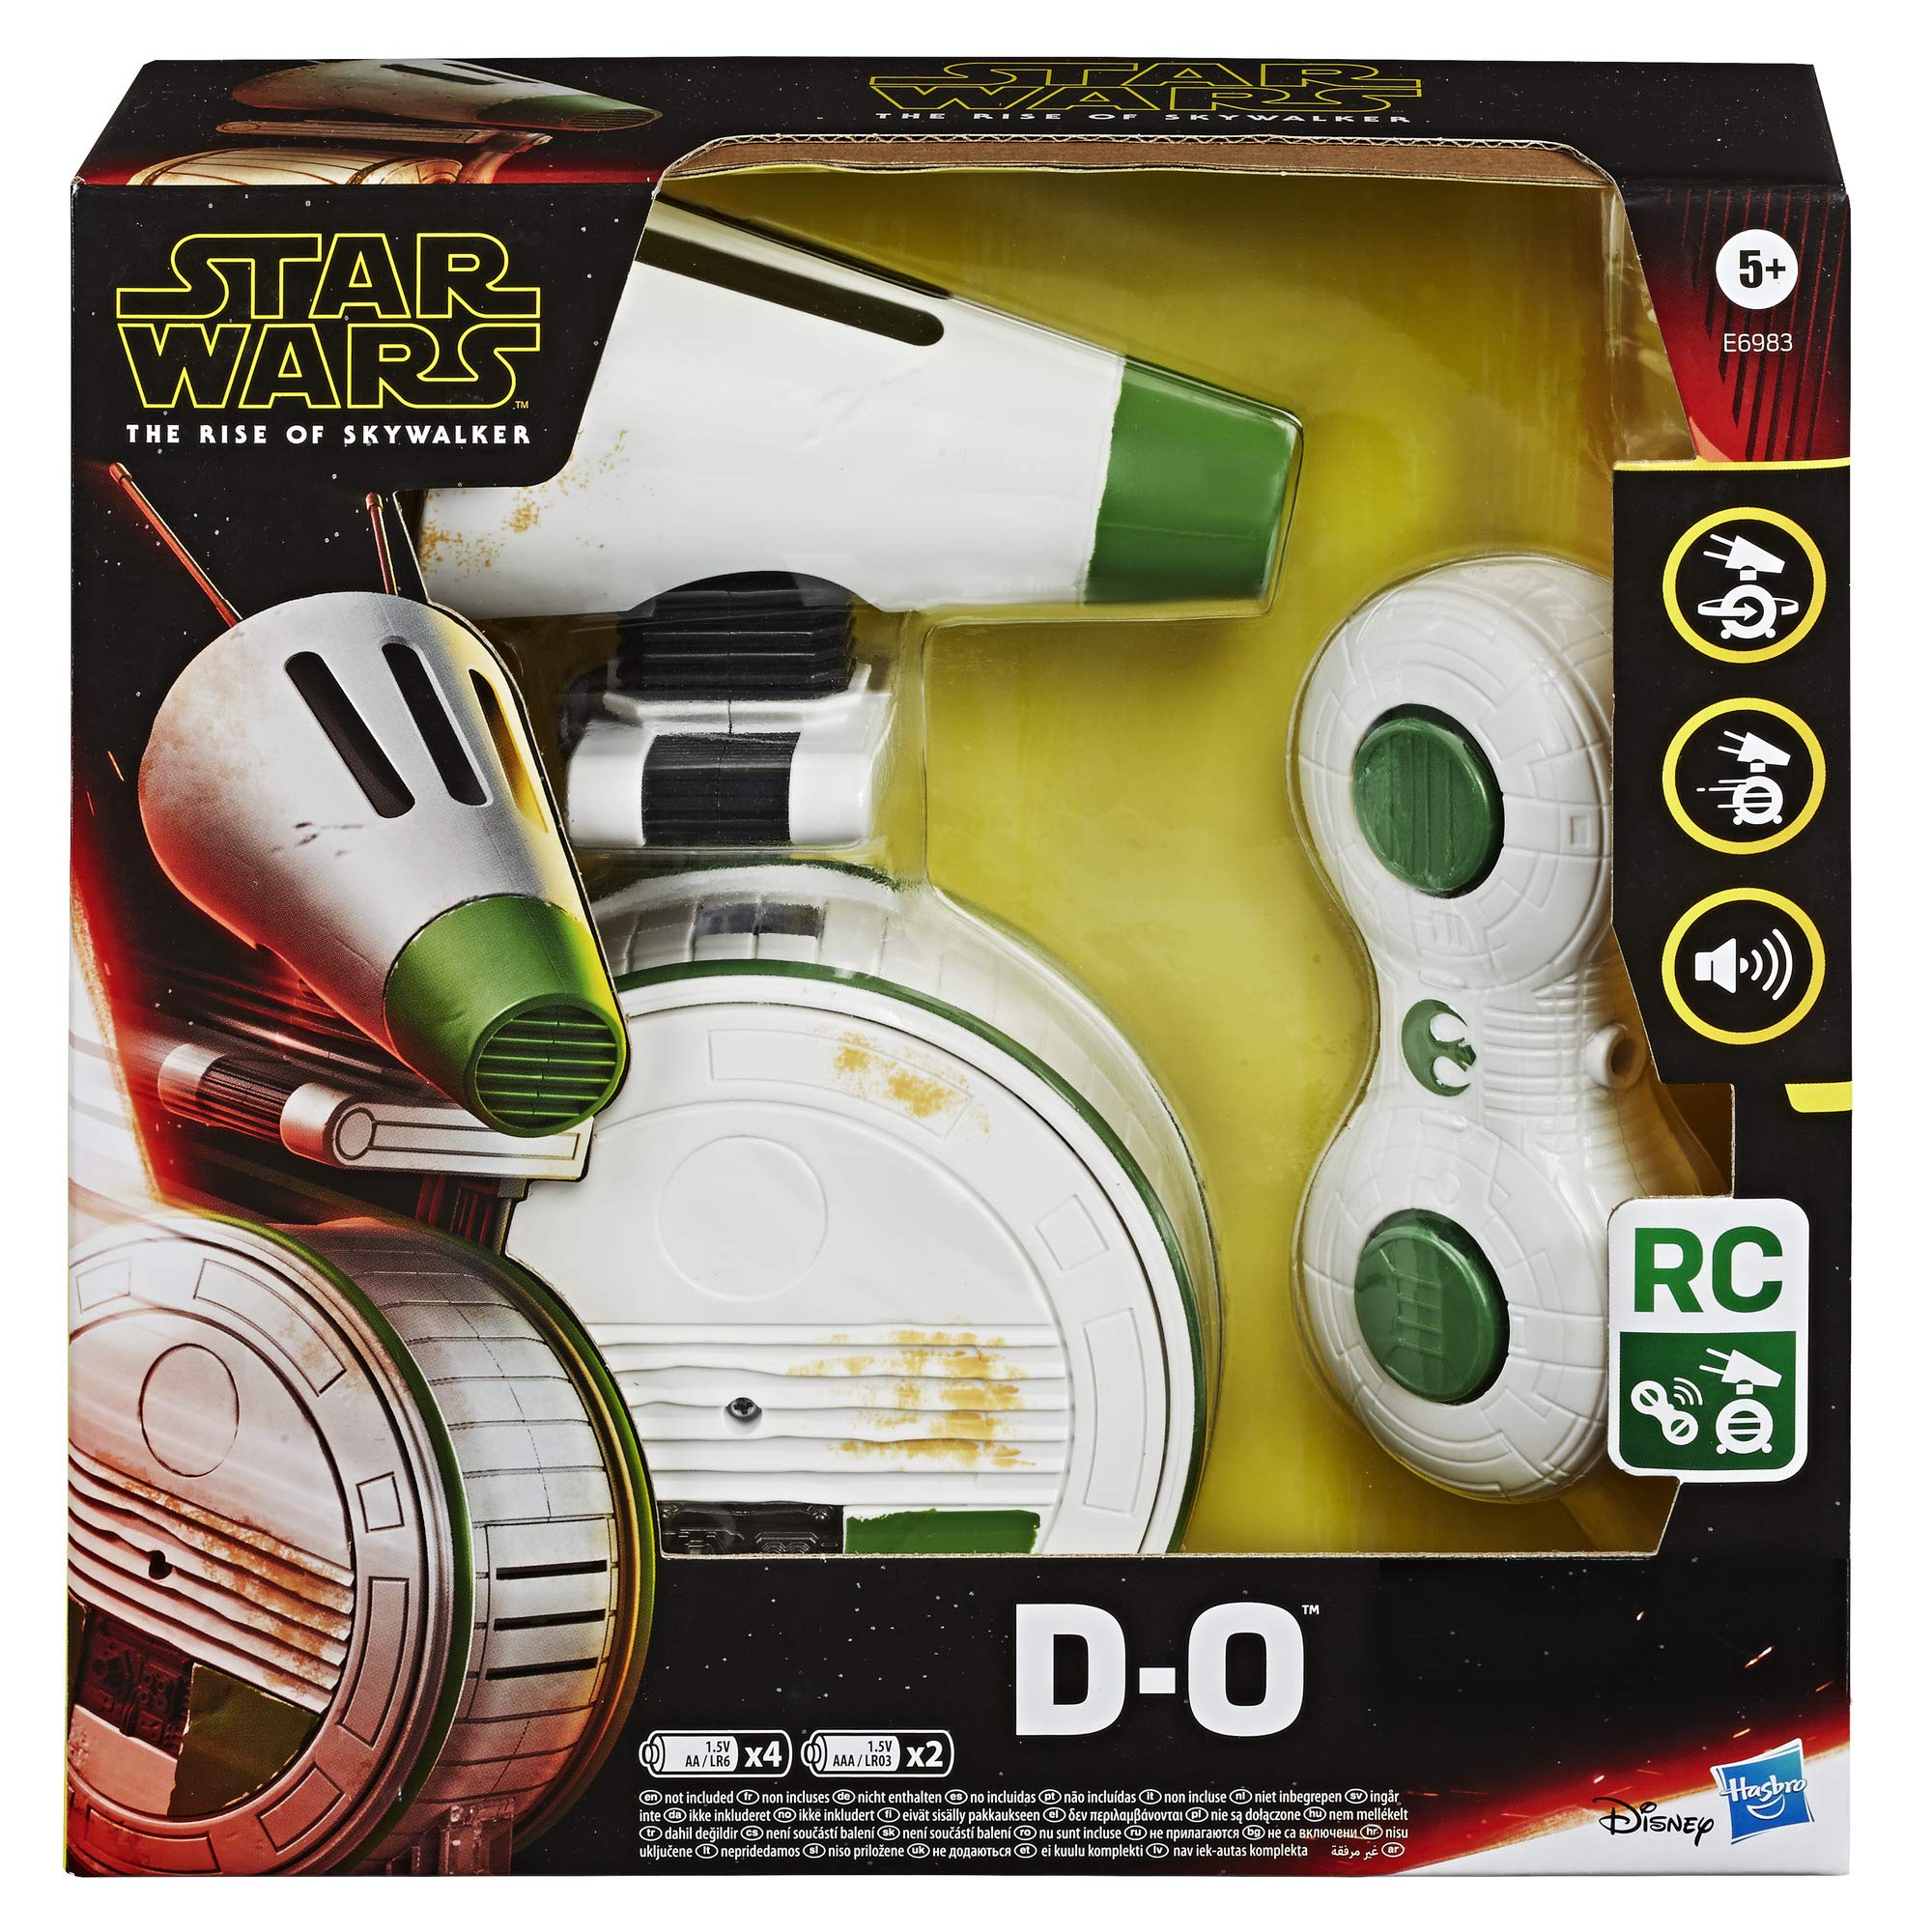 STAR WARS Remote Control D-O Rolling Toy, The Rise of Skywalker Electronic Droid Toy with Sounds, Kids Ages 5 and Up